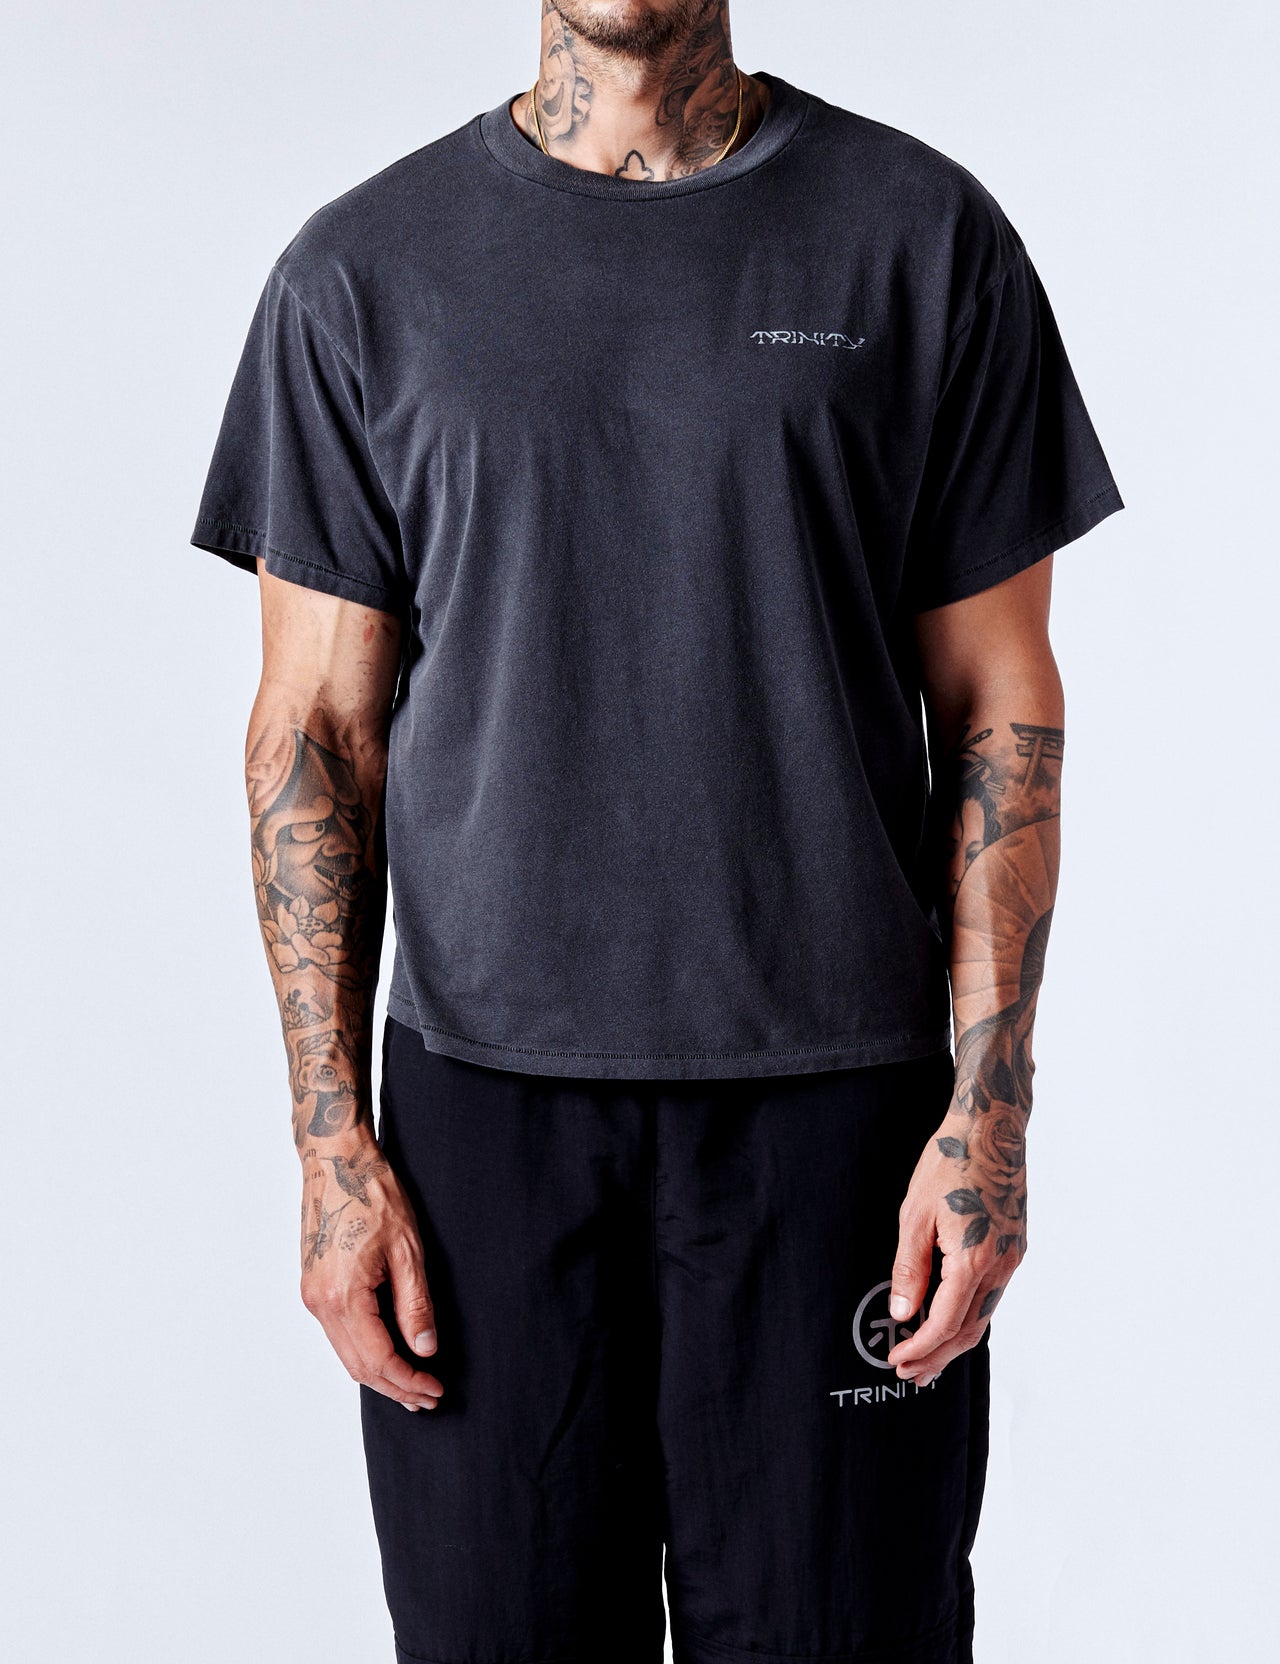 Cropped Cloud Tee - Charcoal